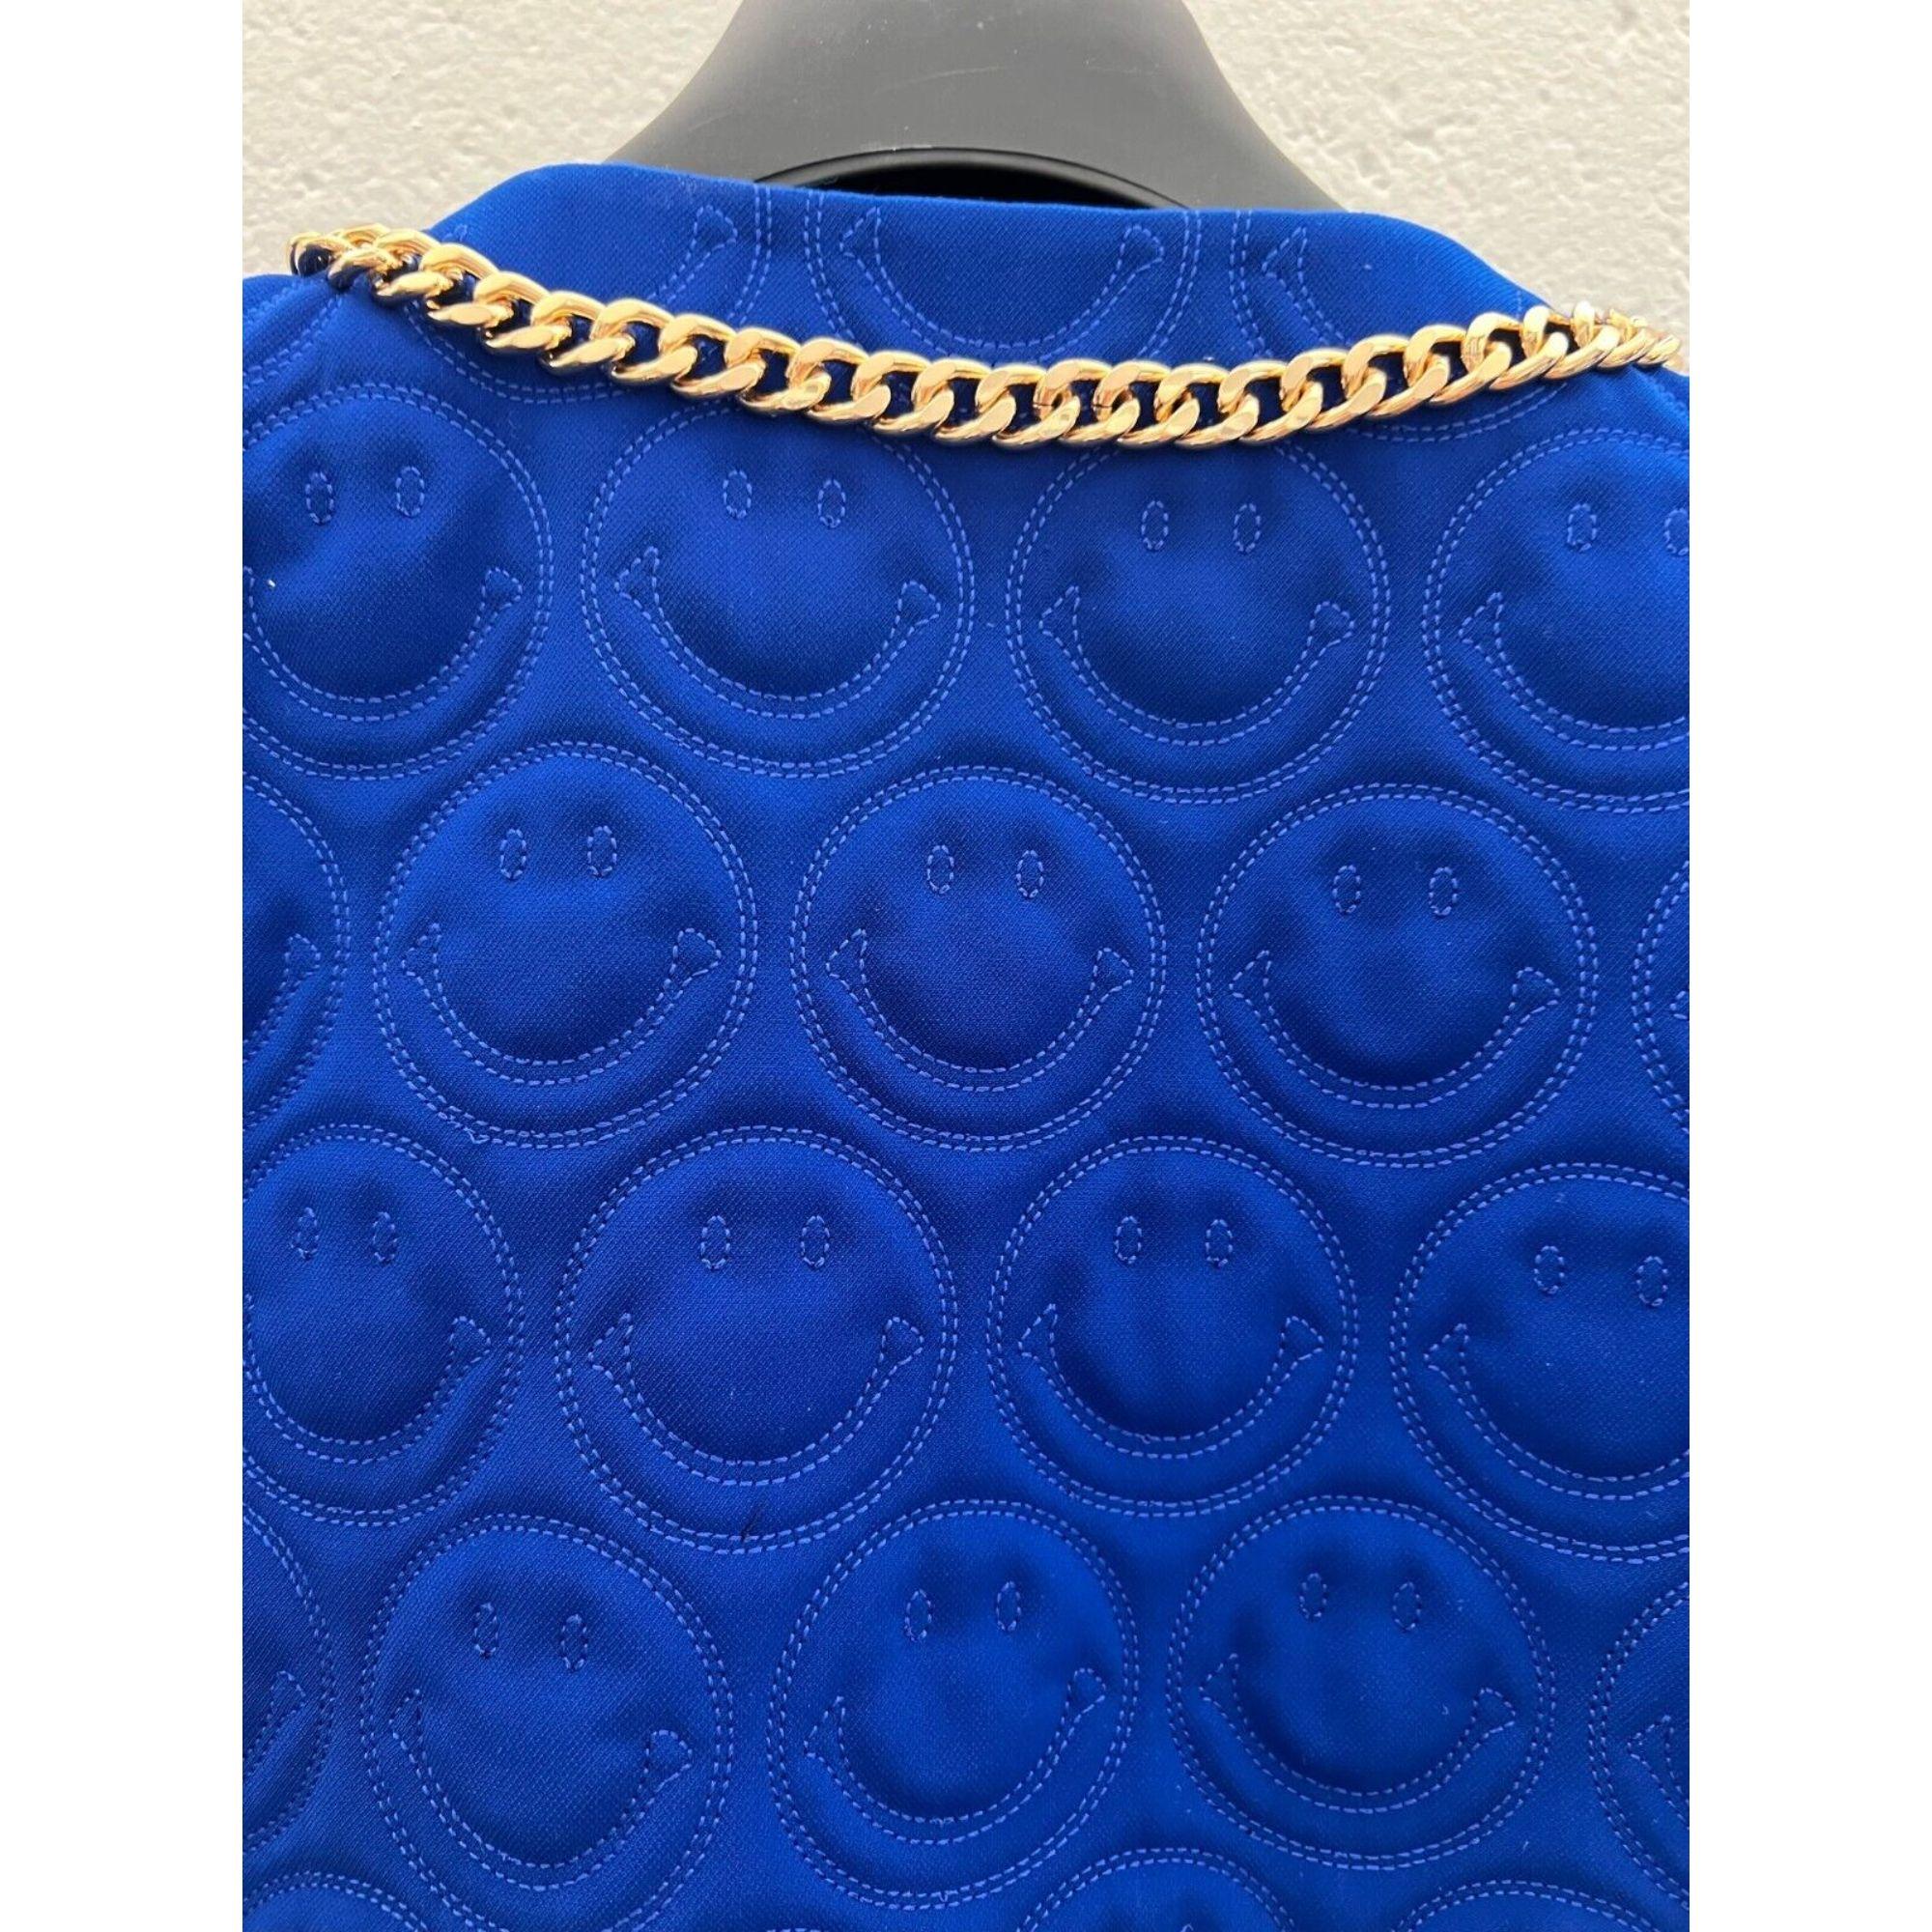 SS21 Moschino Couture BlueBlazer Smiley Face by Jeremy Scott, Size US 12 For Sale 3